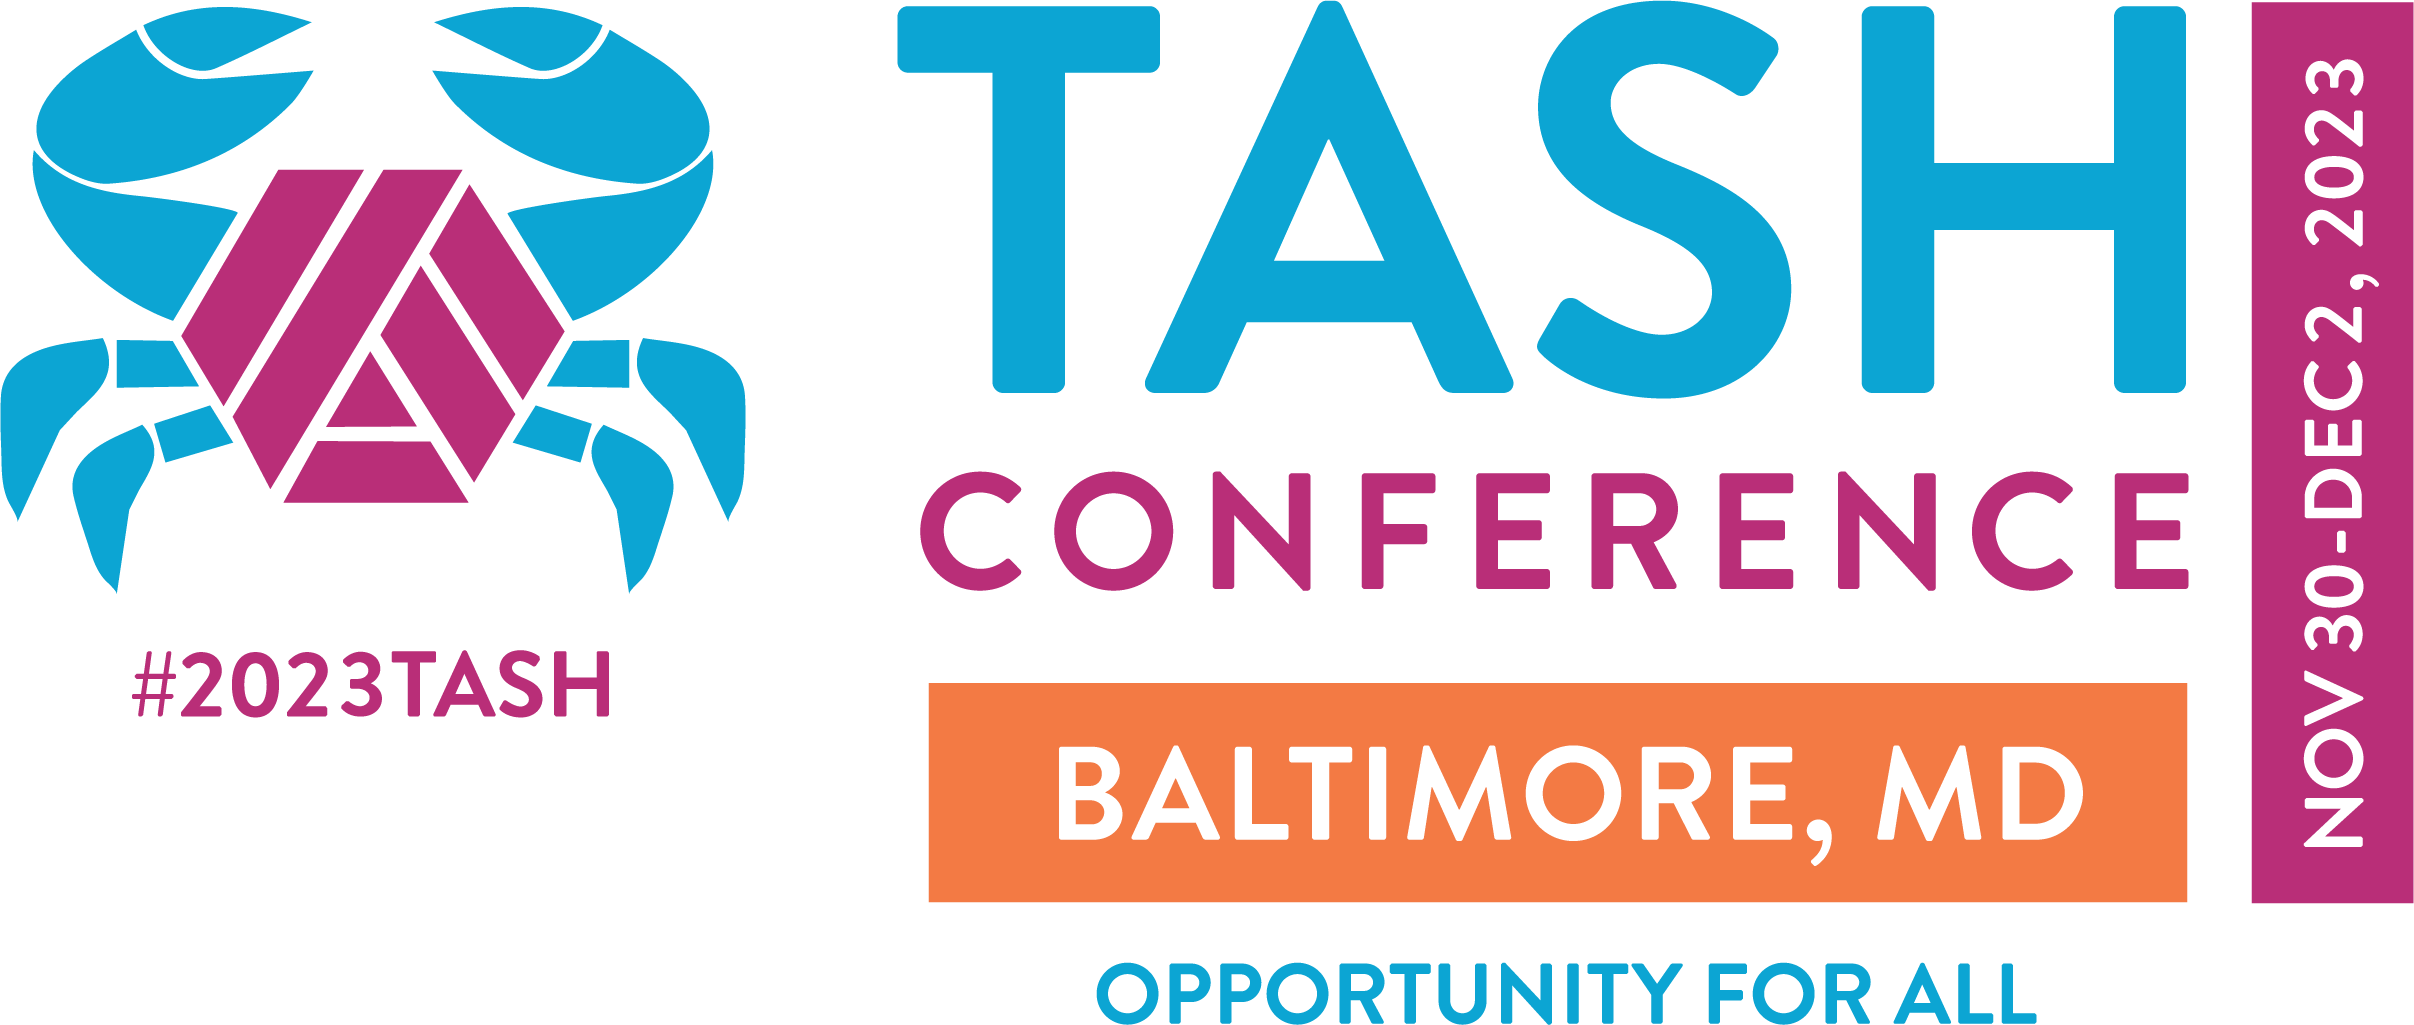 The 2023 TASH Conference logo, Baltimore, Maryland, November 30 - December 2, 2023. There is a graphic of a Chesapeake blue crab with TASH Möbius strip icon for its shell.